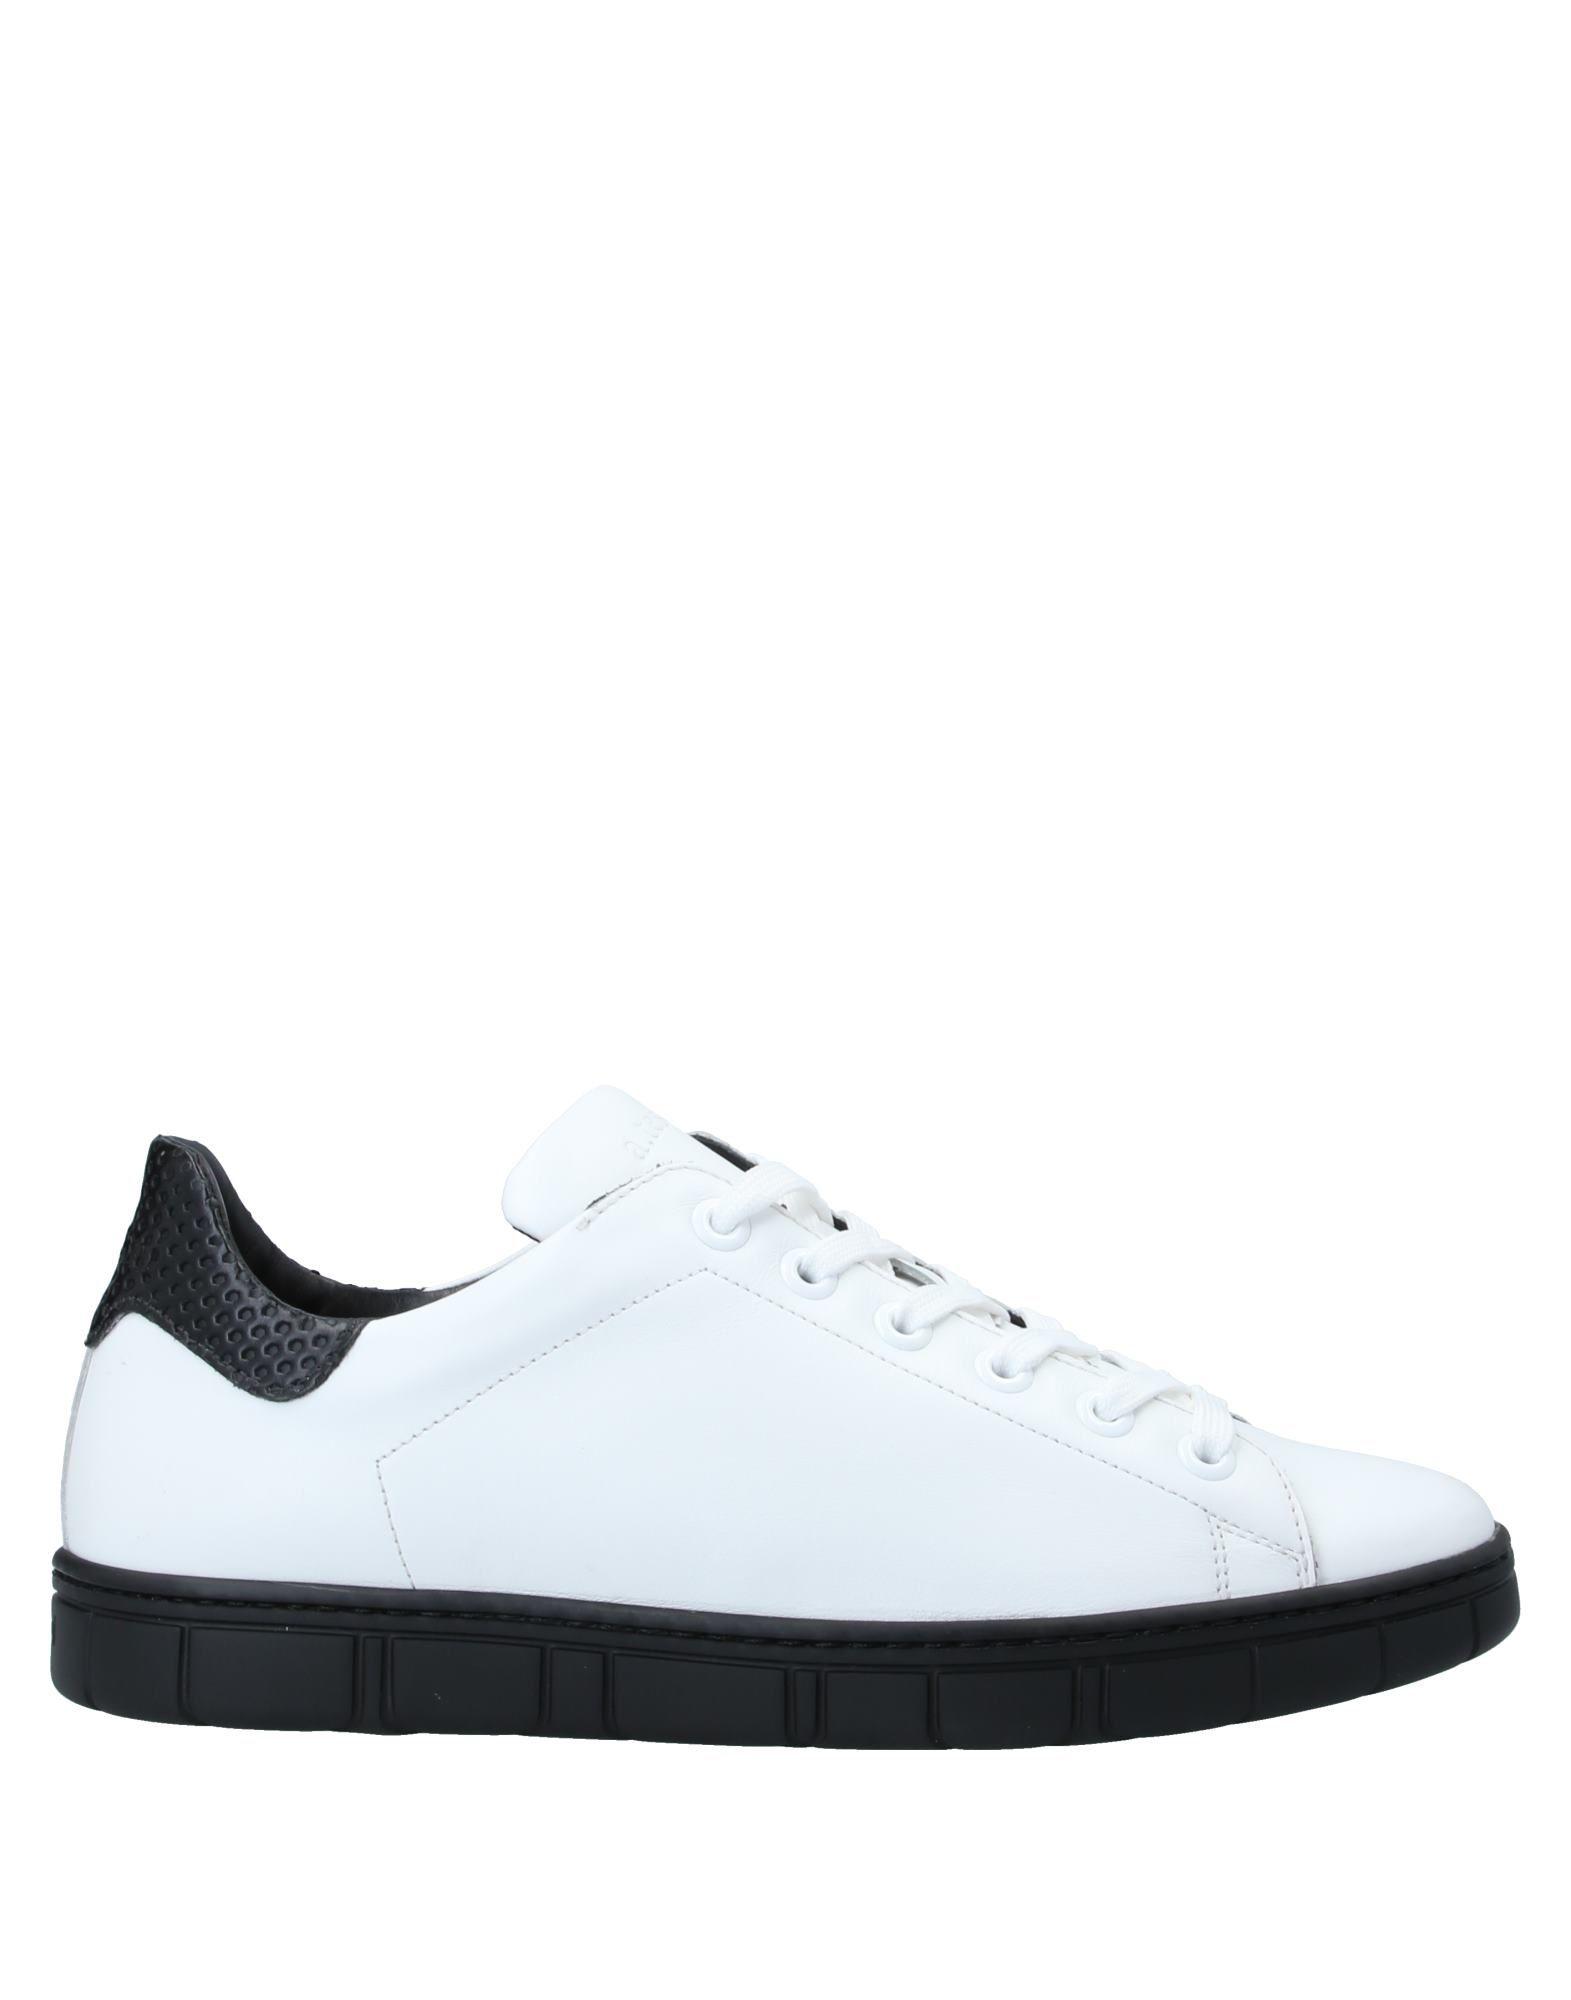 A.Testoni Leather Low-tops & Sneakers in White for Men - Lyst